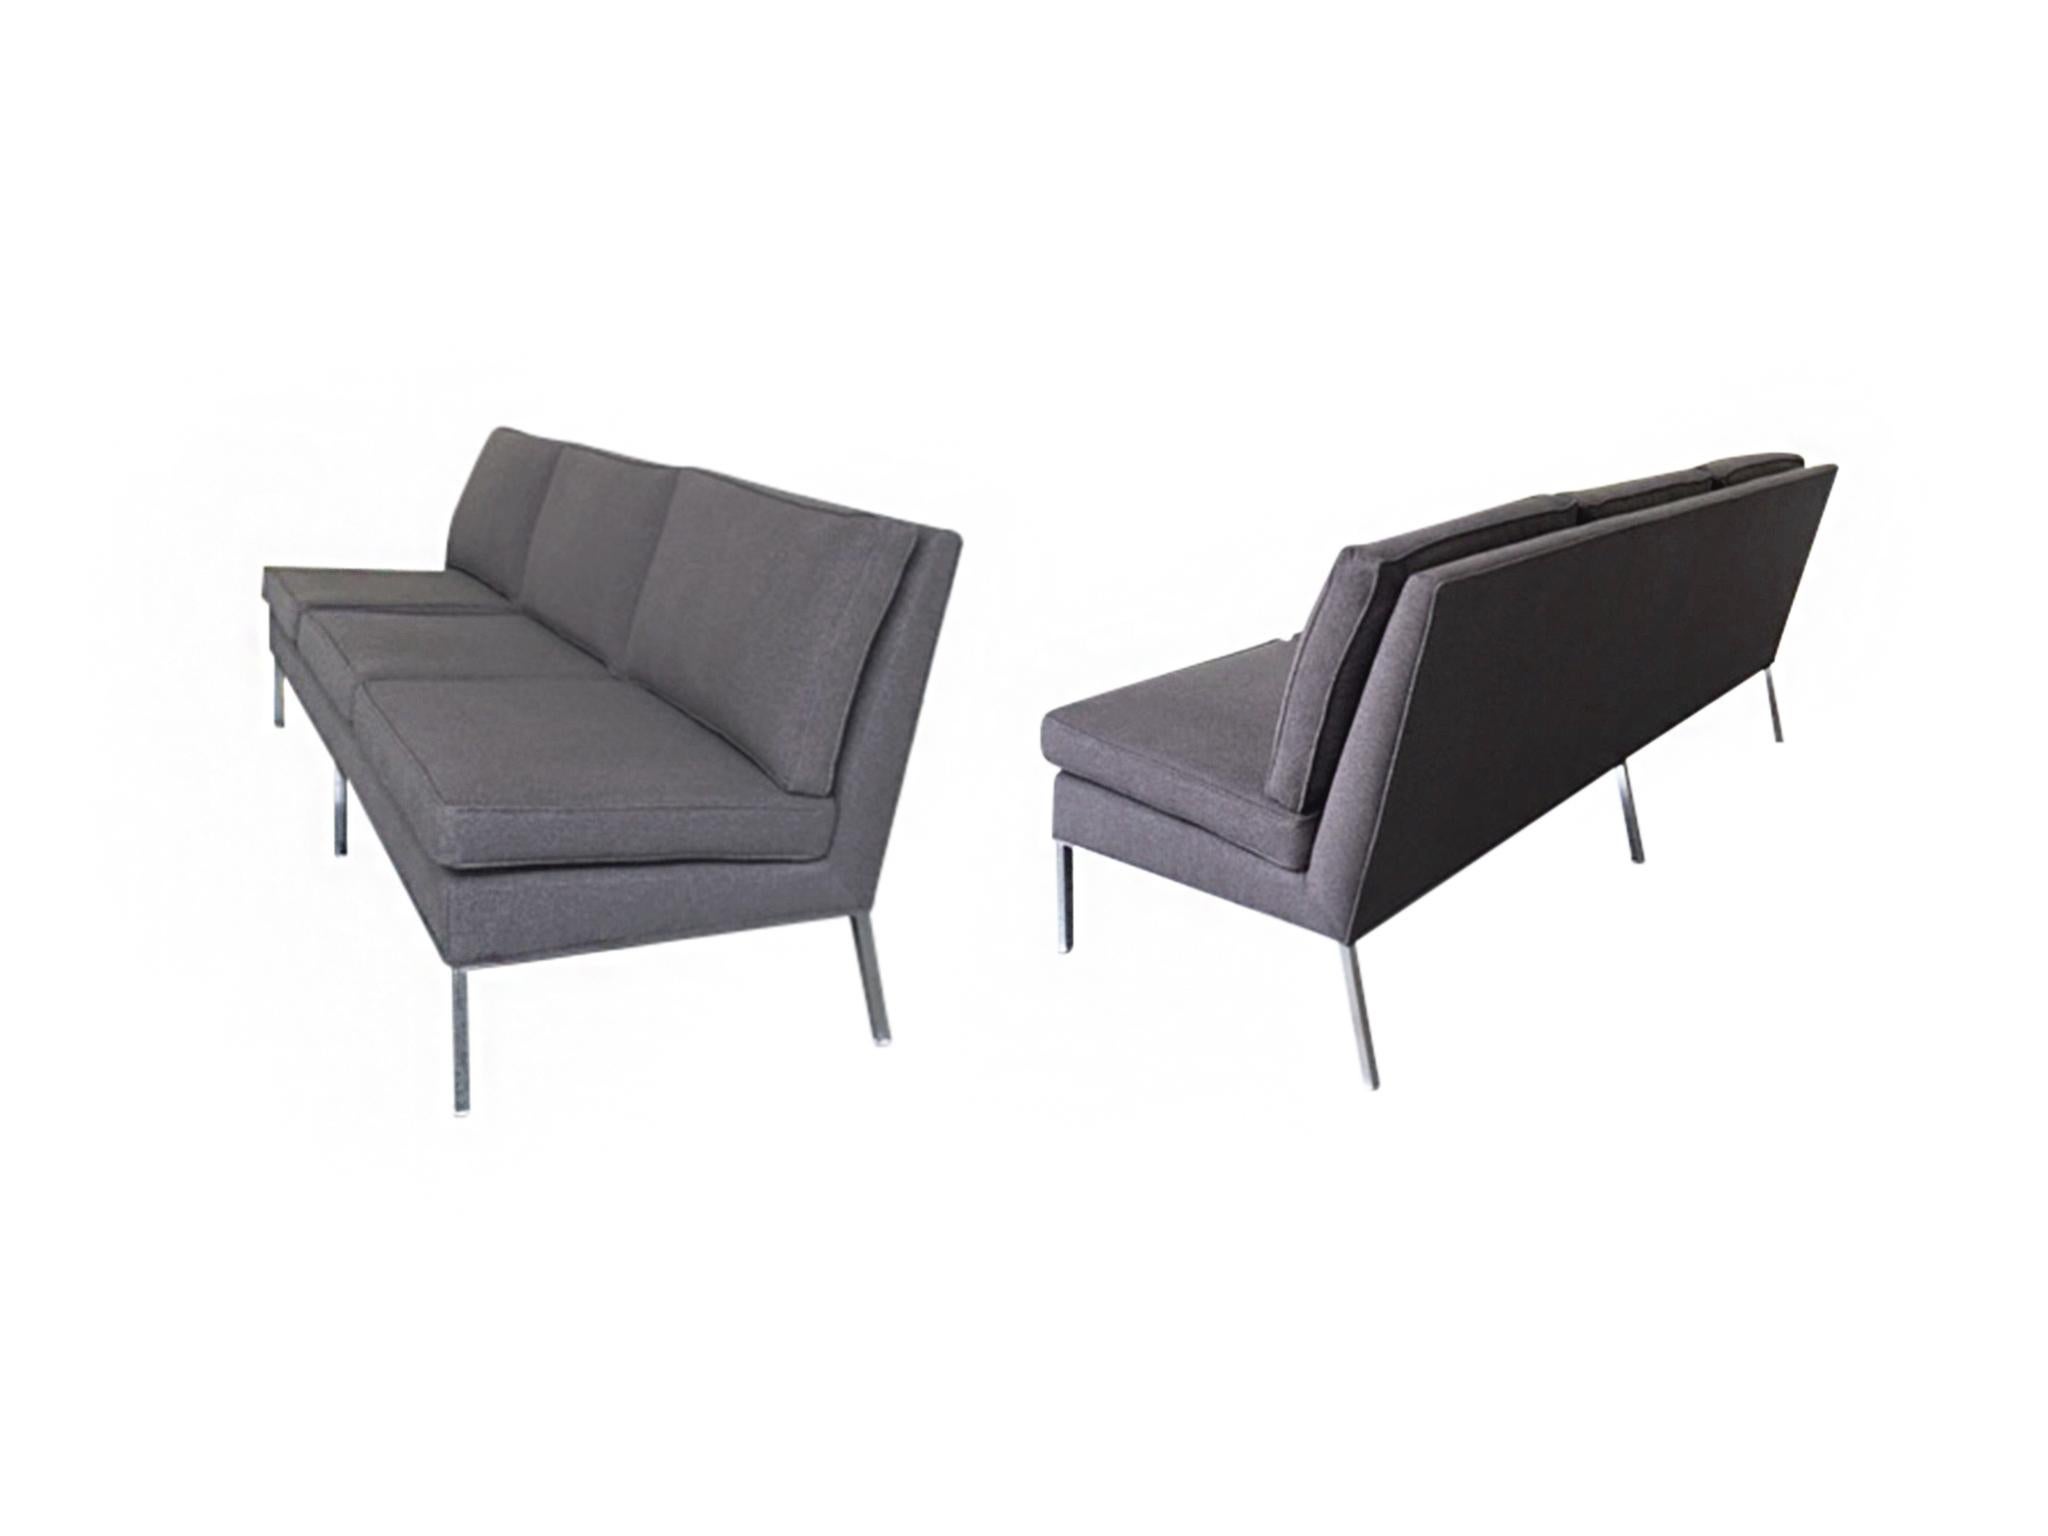 These two sofas were designed by Florence Knoll in the 1950s. They are a three-seater and are armless, providing open space and easy access on three sides. While the base is the original chromed steel frame, both the upholstery and cushioning are